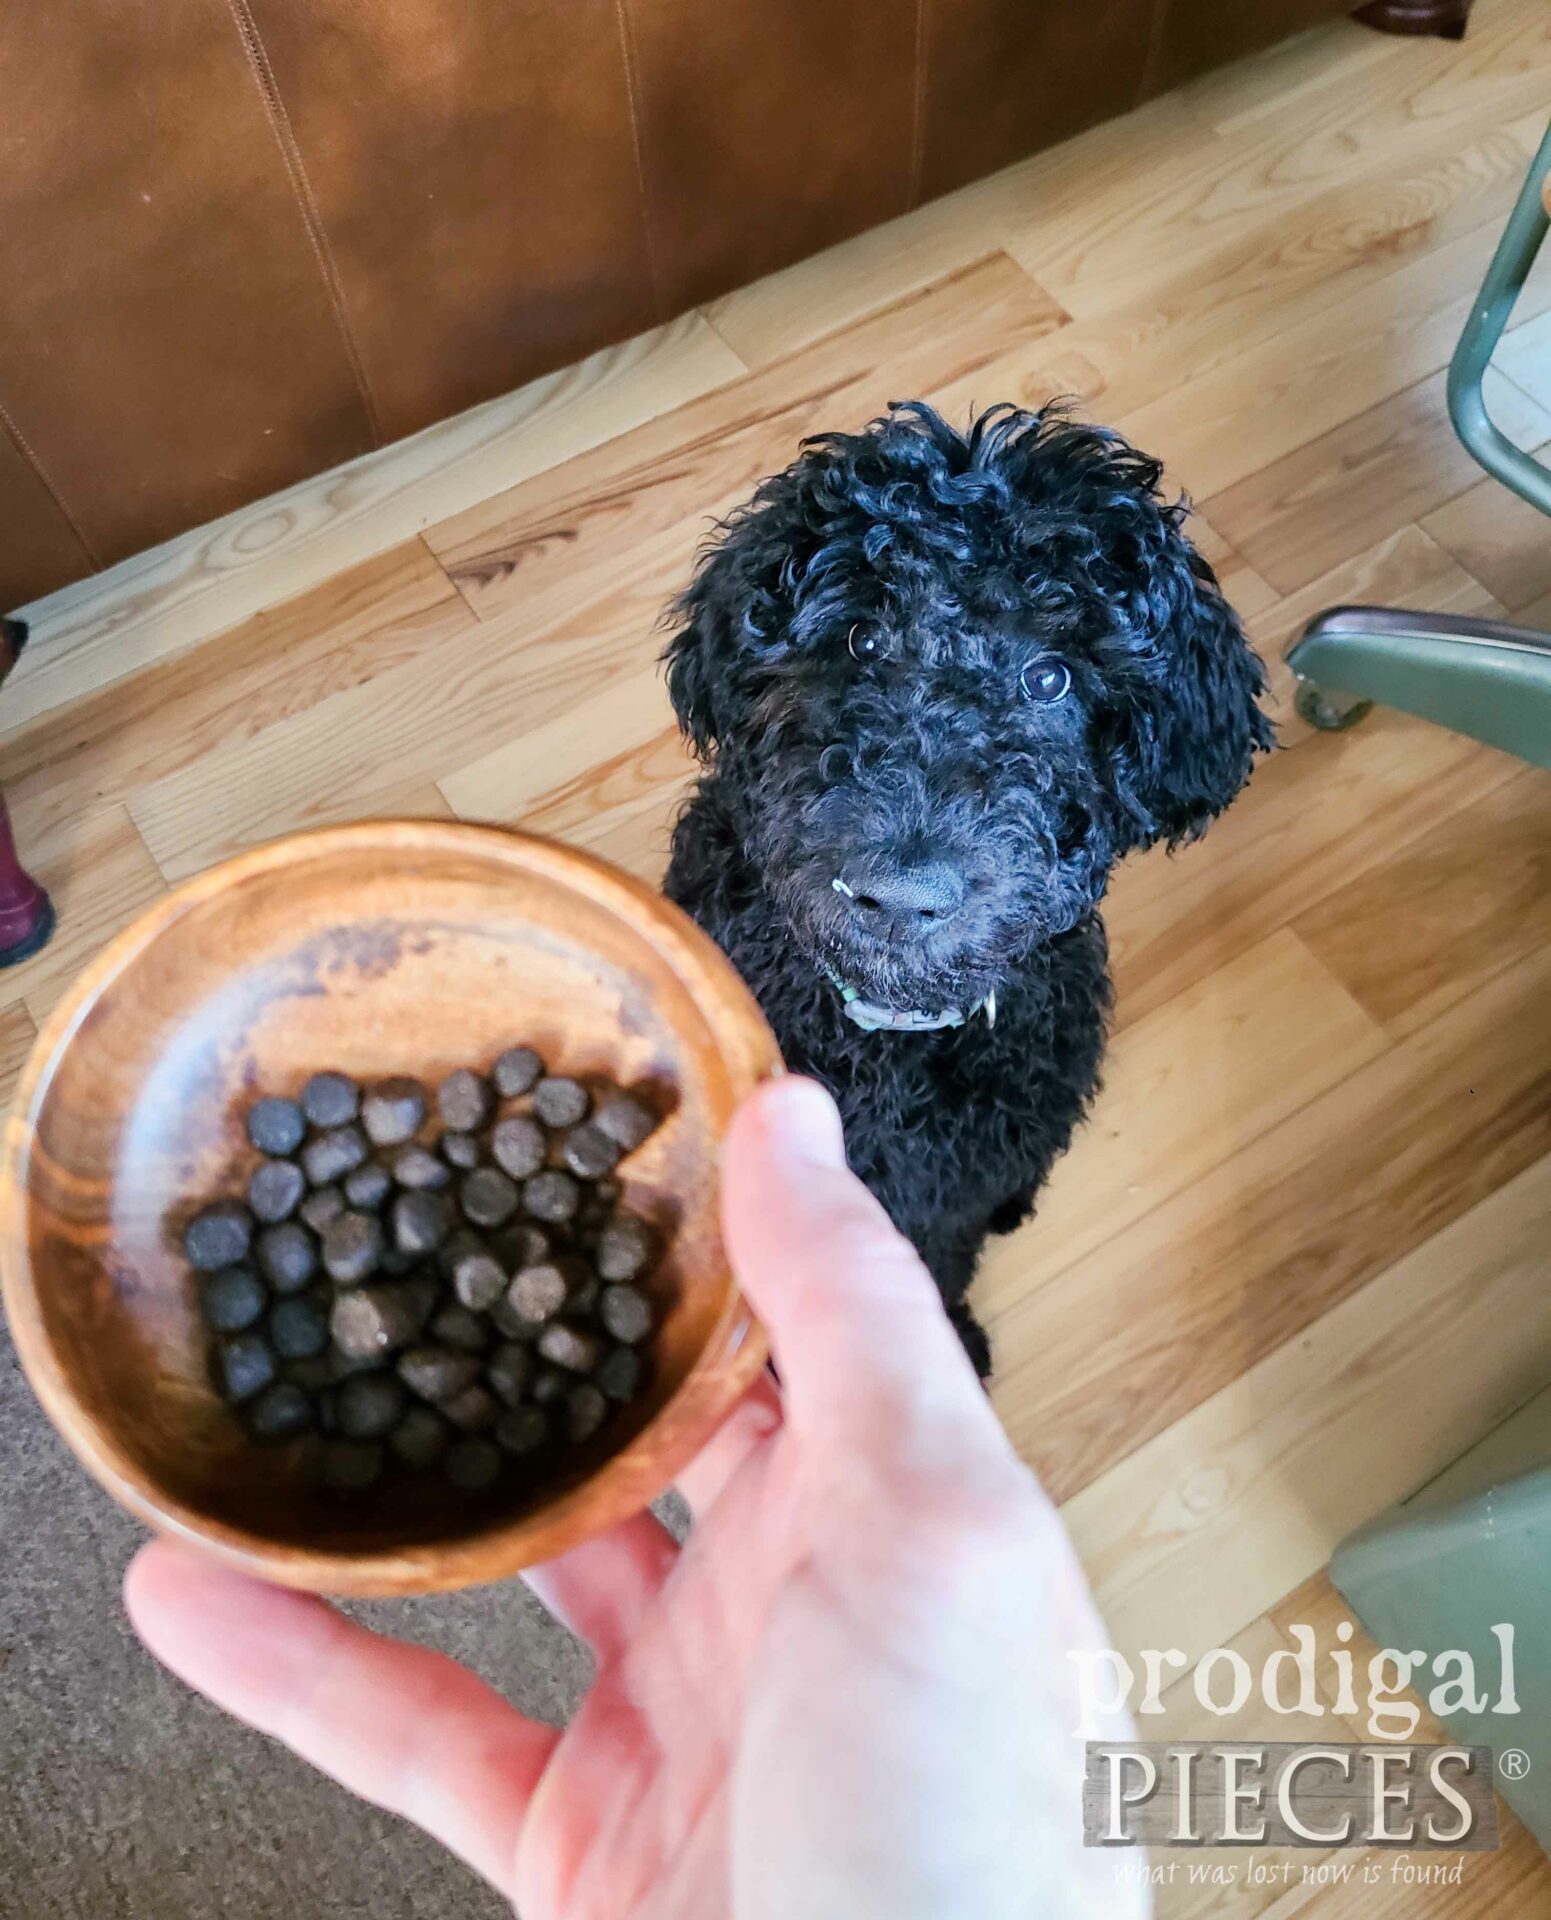 Potty Trained Black Goldendoodle Puppy with Upcycled Salad Bowl for Treats by Larissa of Prodigal Pieces | prodigalpieces.com #prodigalpieces #puppy